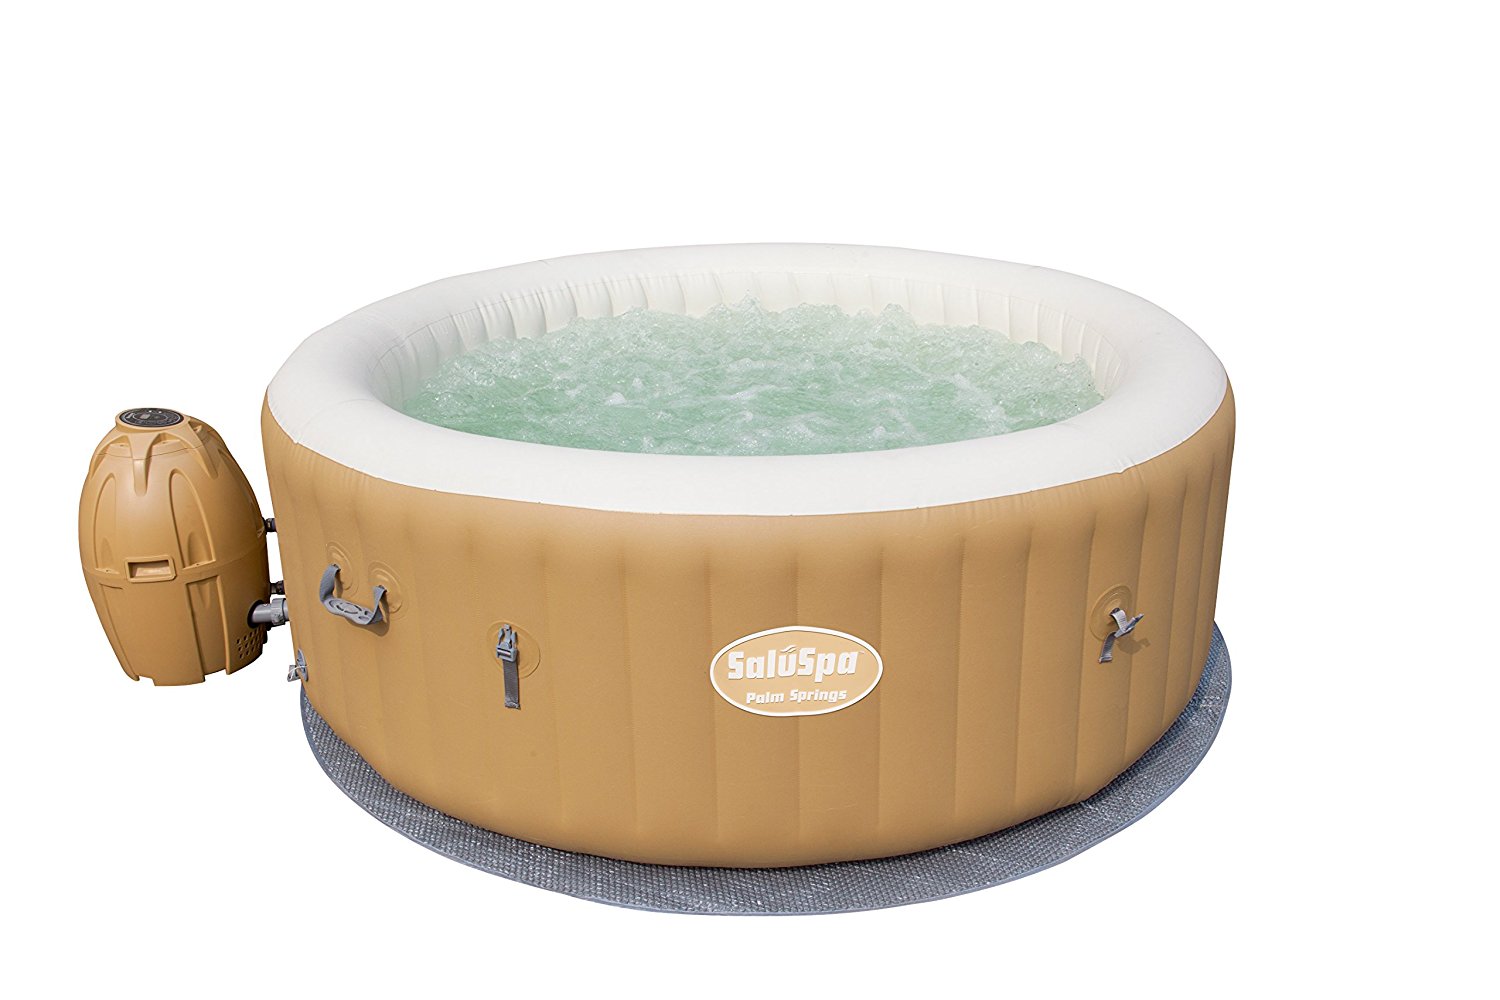 SaluSpa Palm Springs 6-Person AirJet Inflatable Hot Tub  $299.99 + Free Shipping